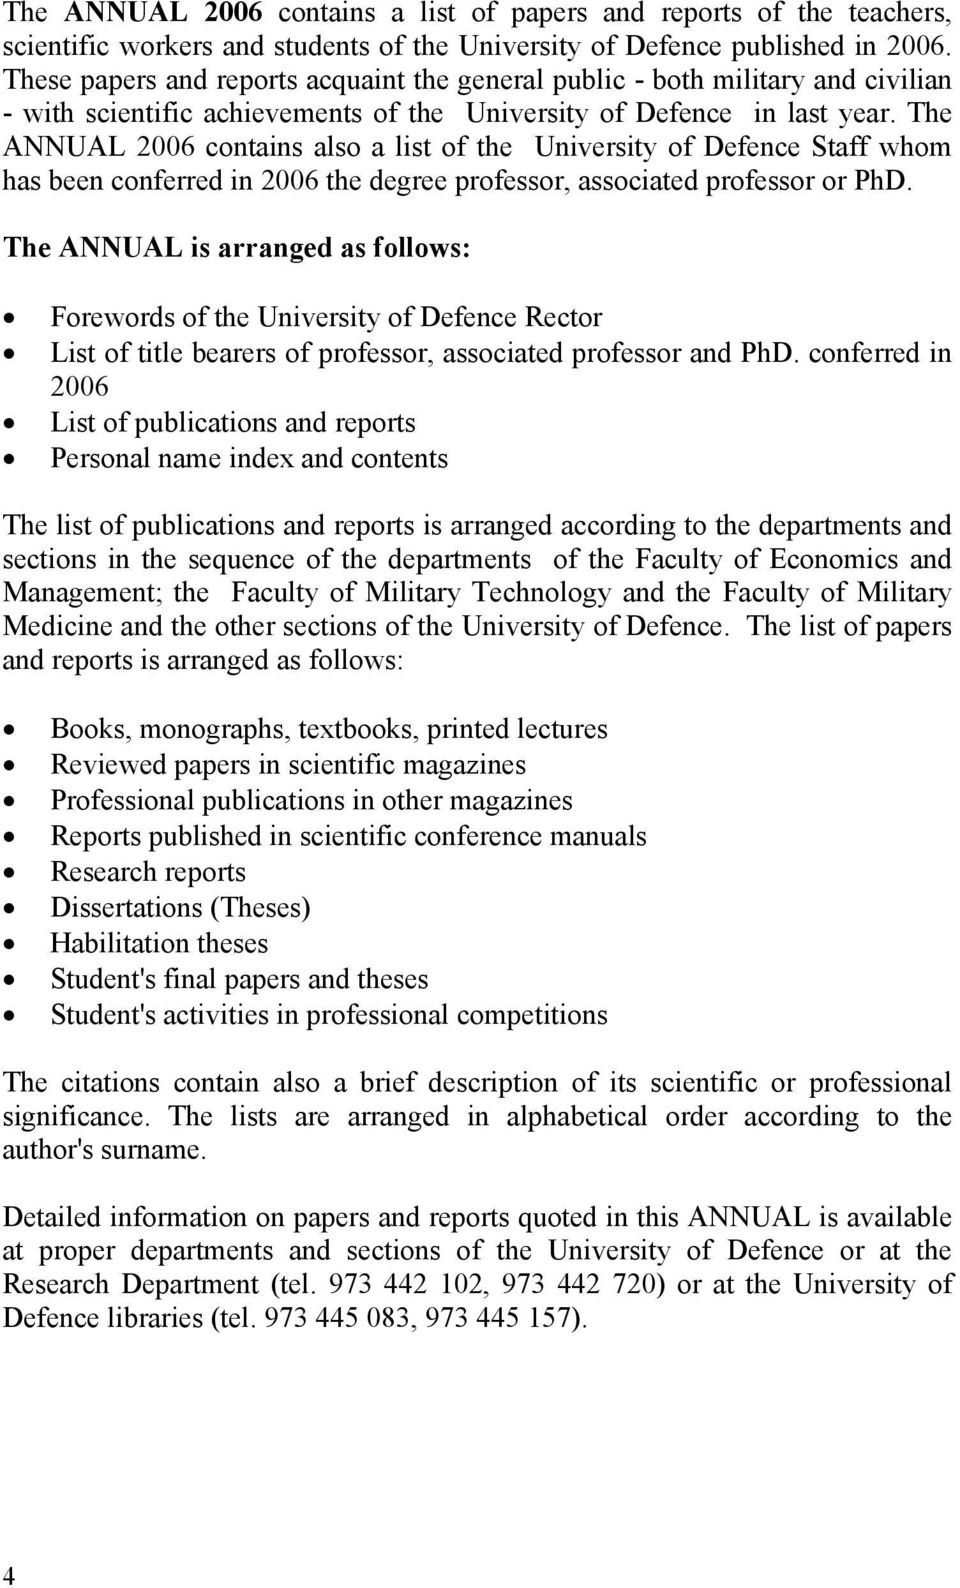 The ANNUAL 2006 contains also a list of the University of Defence Staff whom has been conferred in 2006 the degree professor, associated professor or PhD.